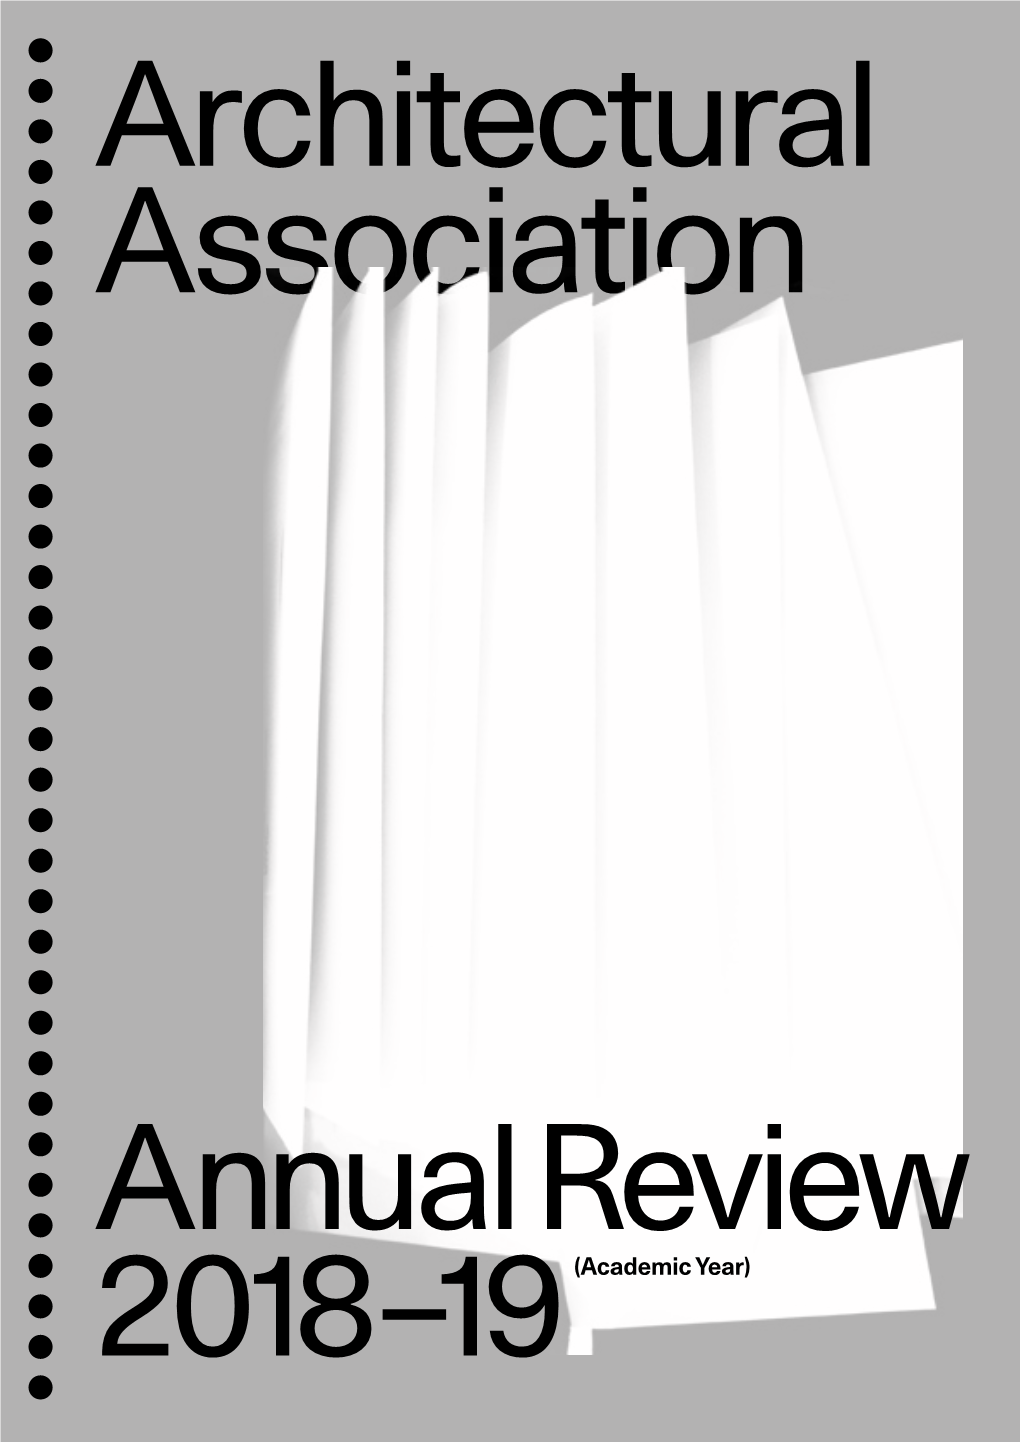 Annual Review 2018-19Download